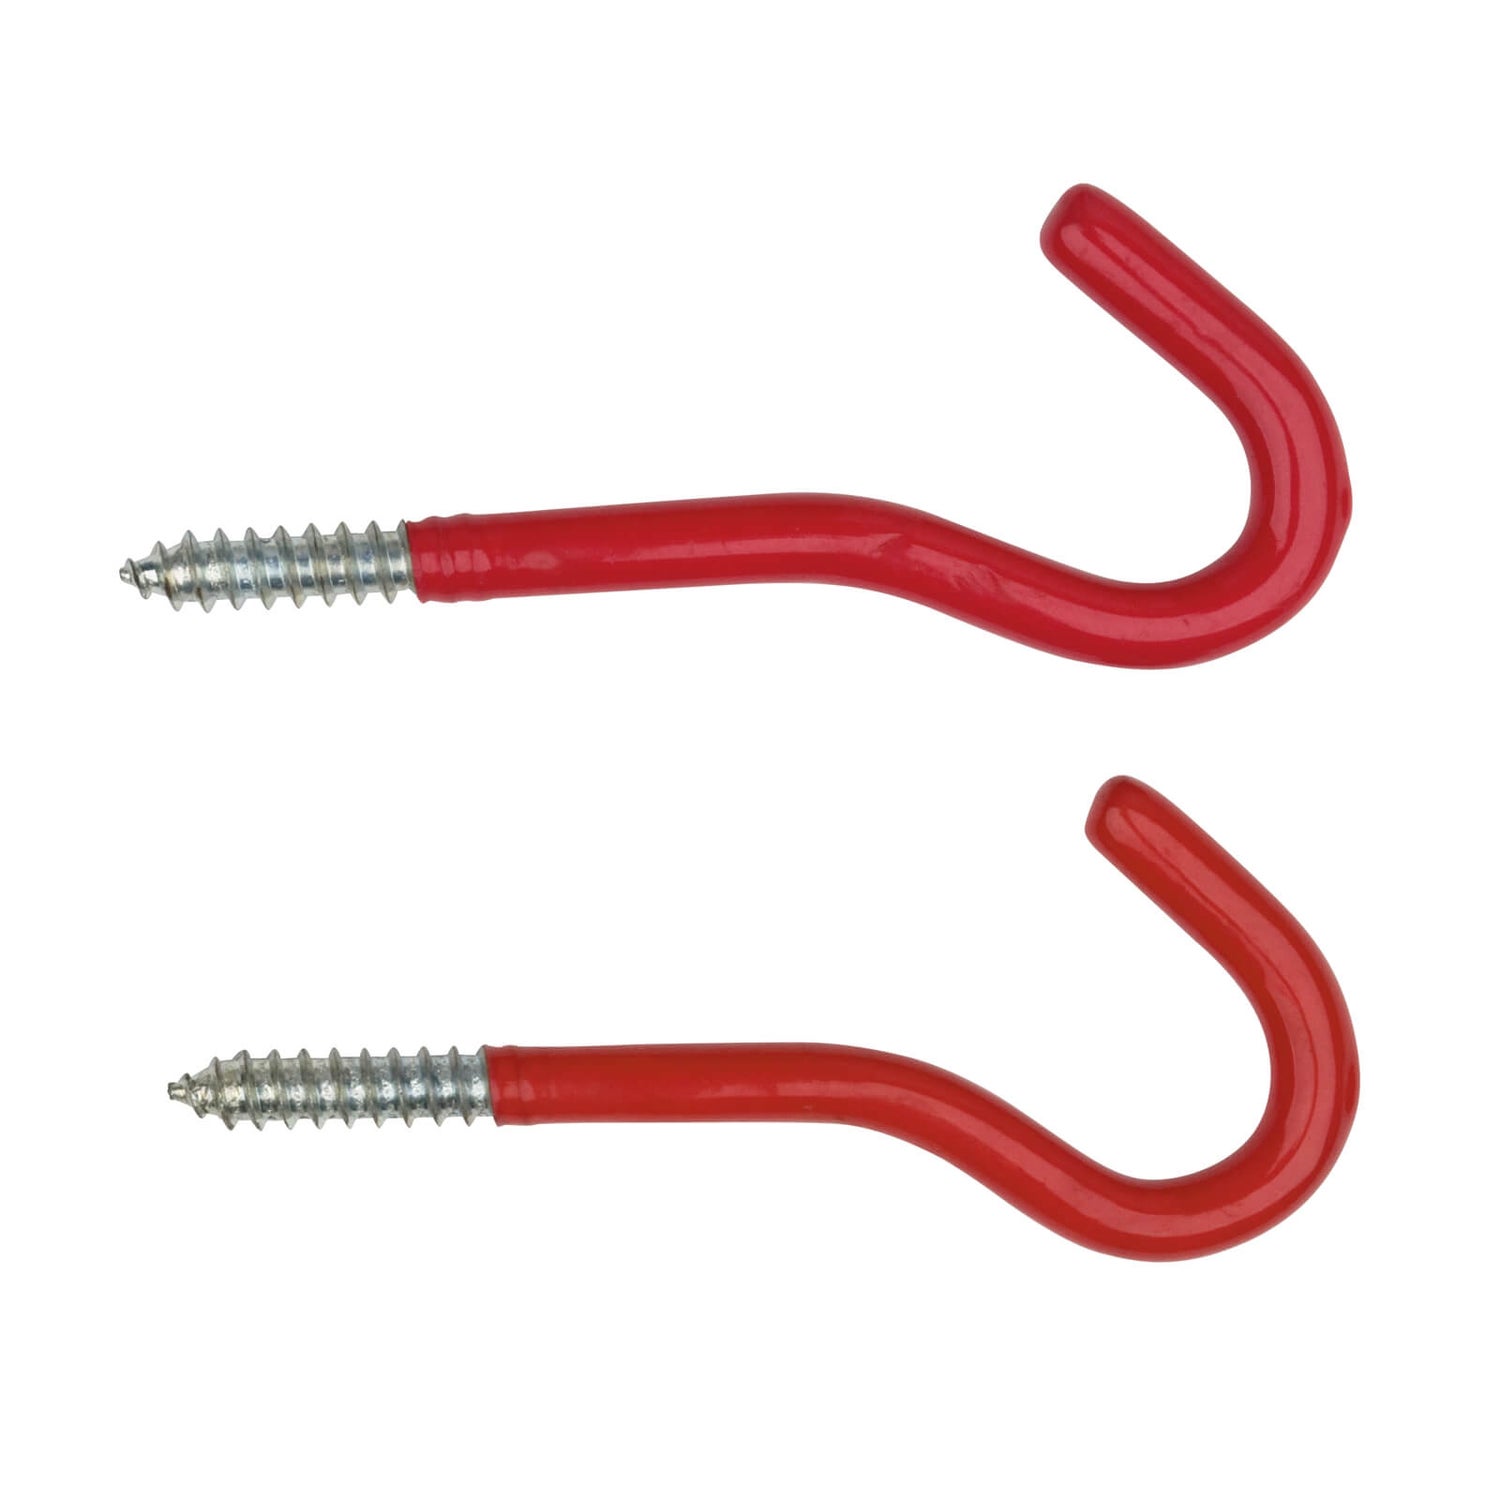 Round Utility Hook - Red - 2 Pack